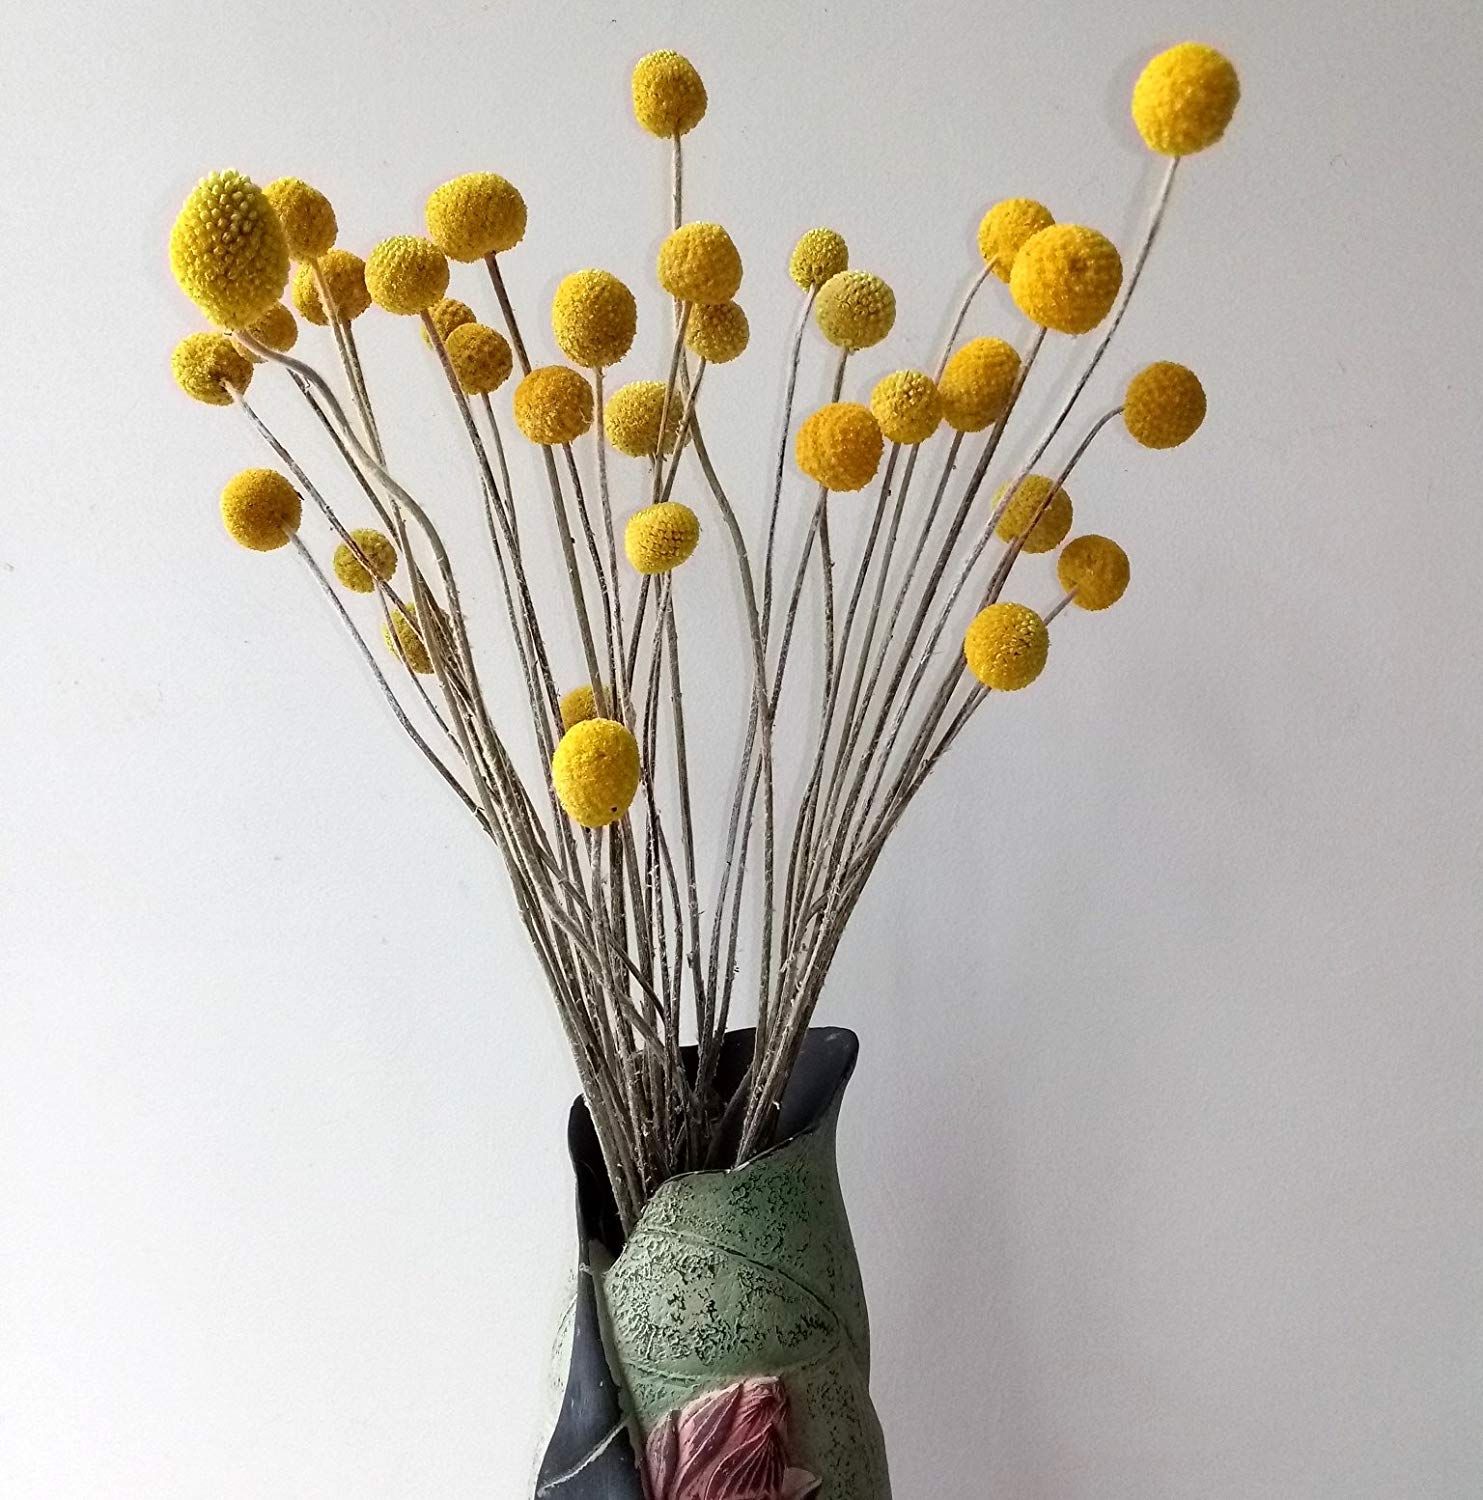 billy buttons, enjoy the elegance suggested by gardengreen